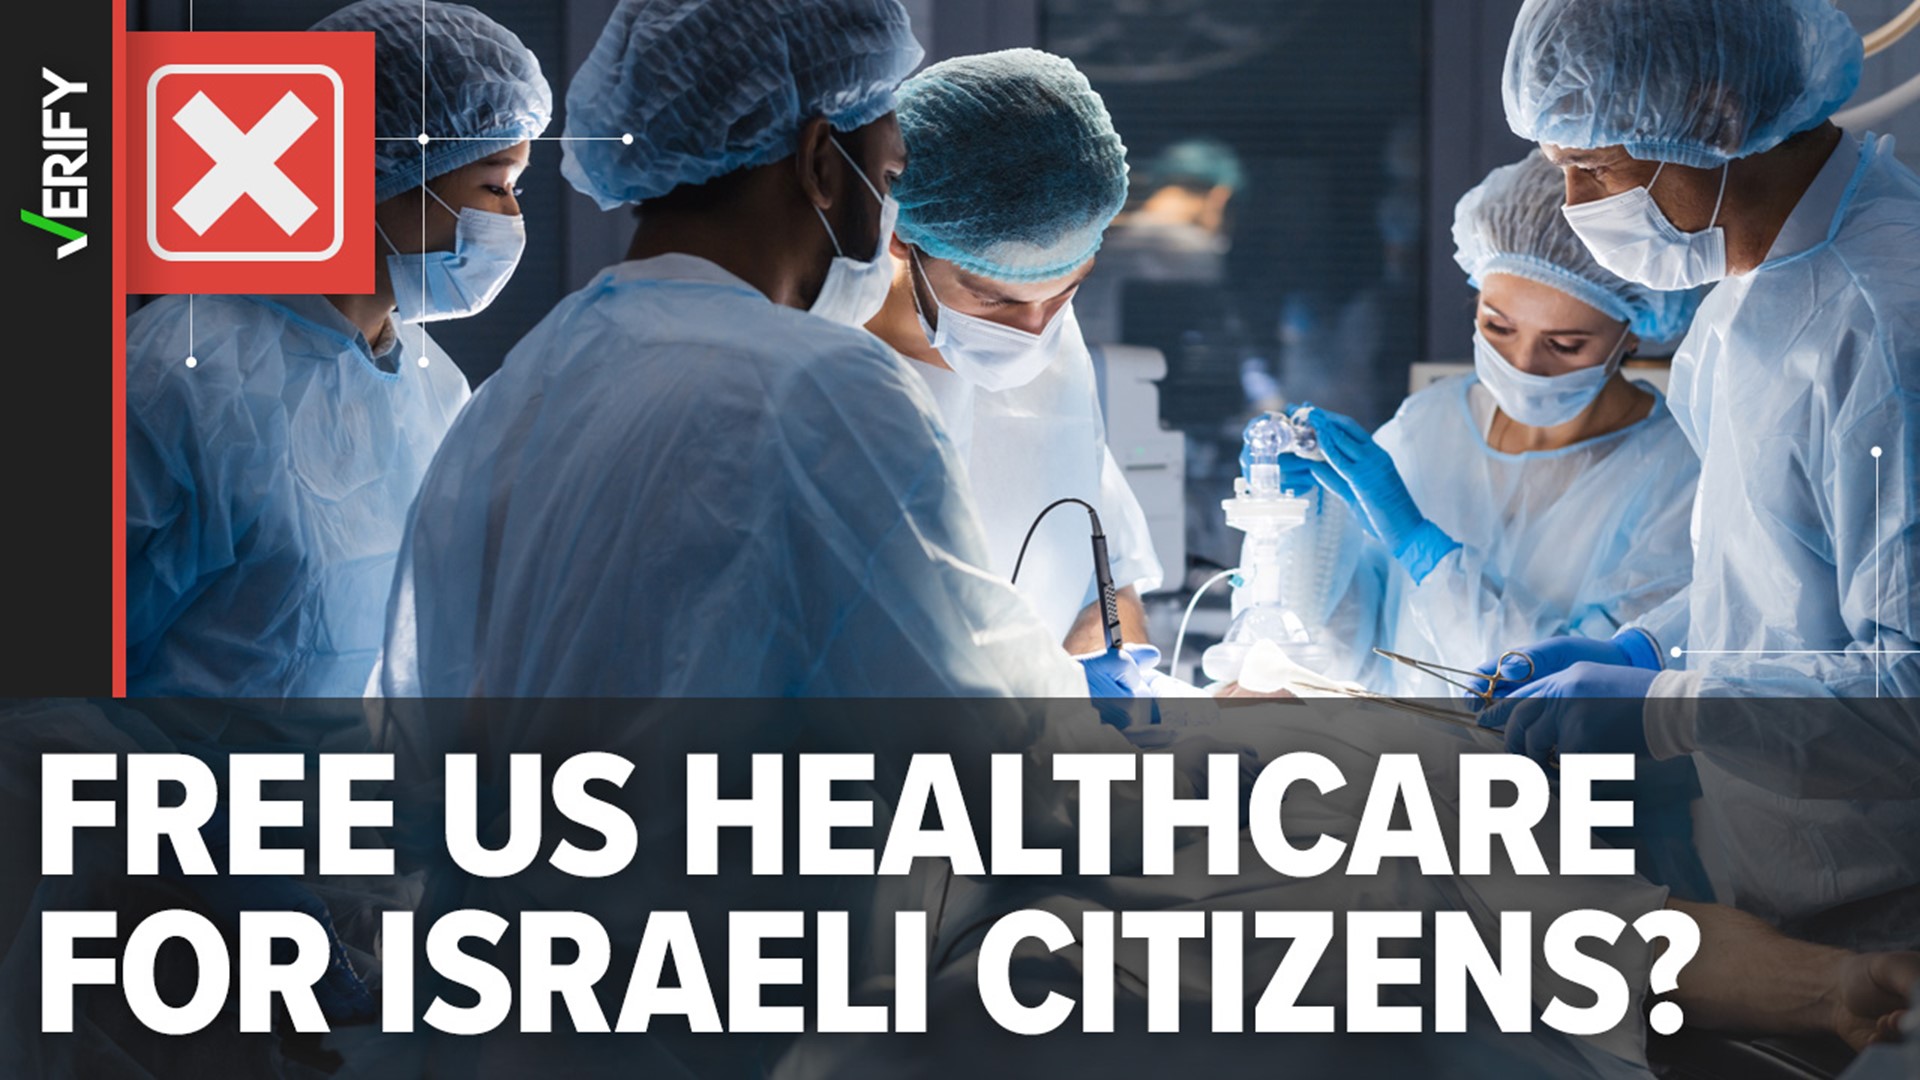 Medical tourists pay for their treatment like American patients. There's no exemption for Israelis, as viral posts claim.